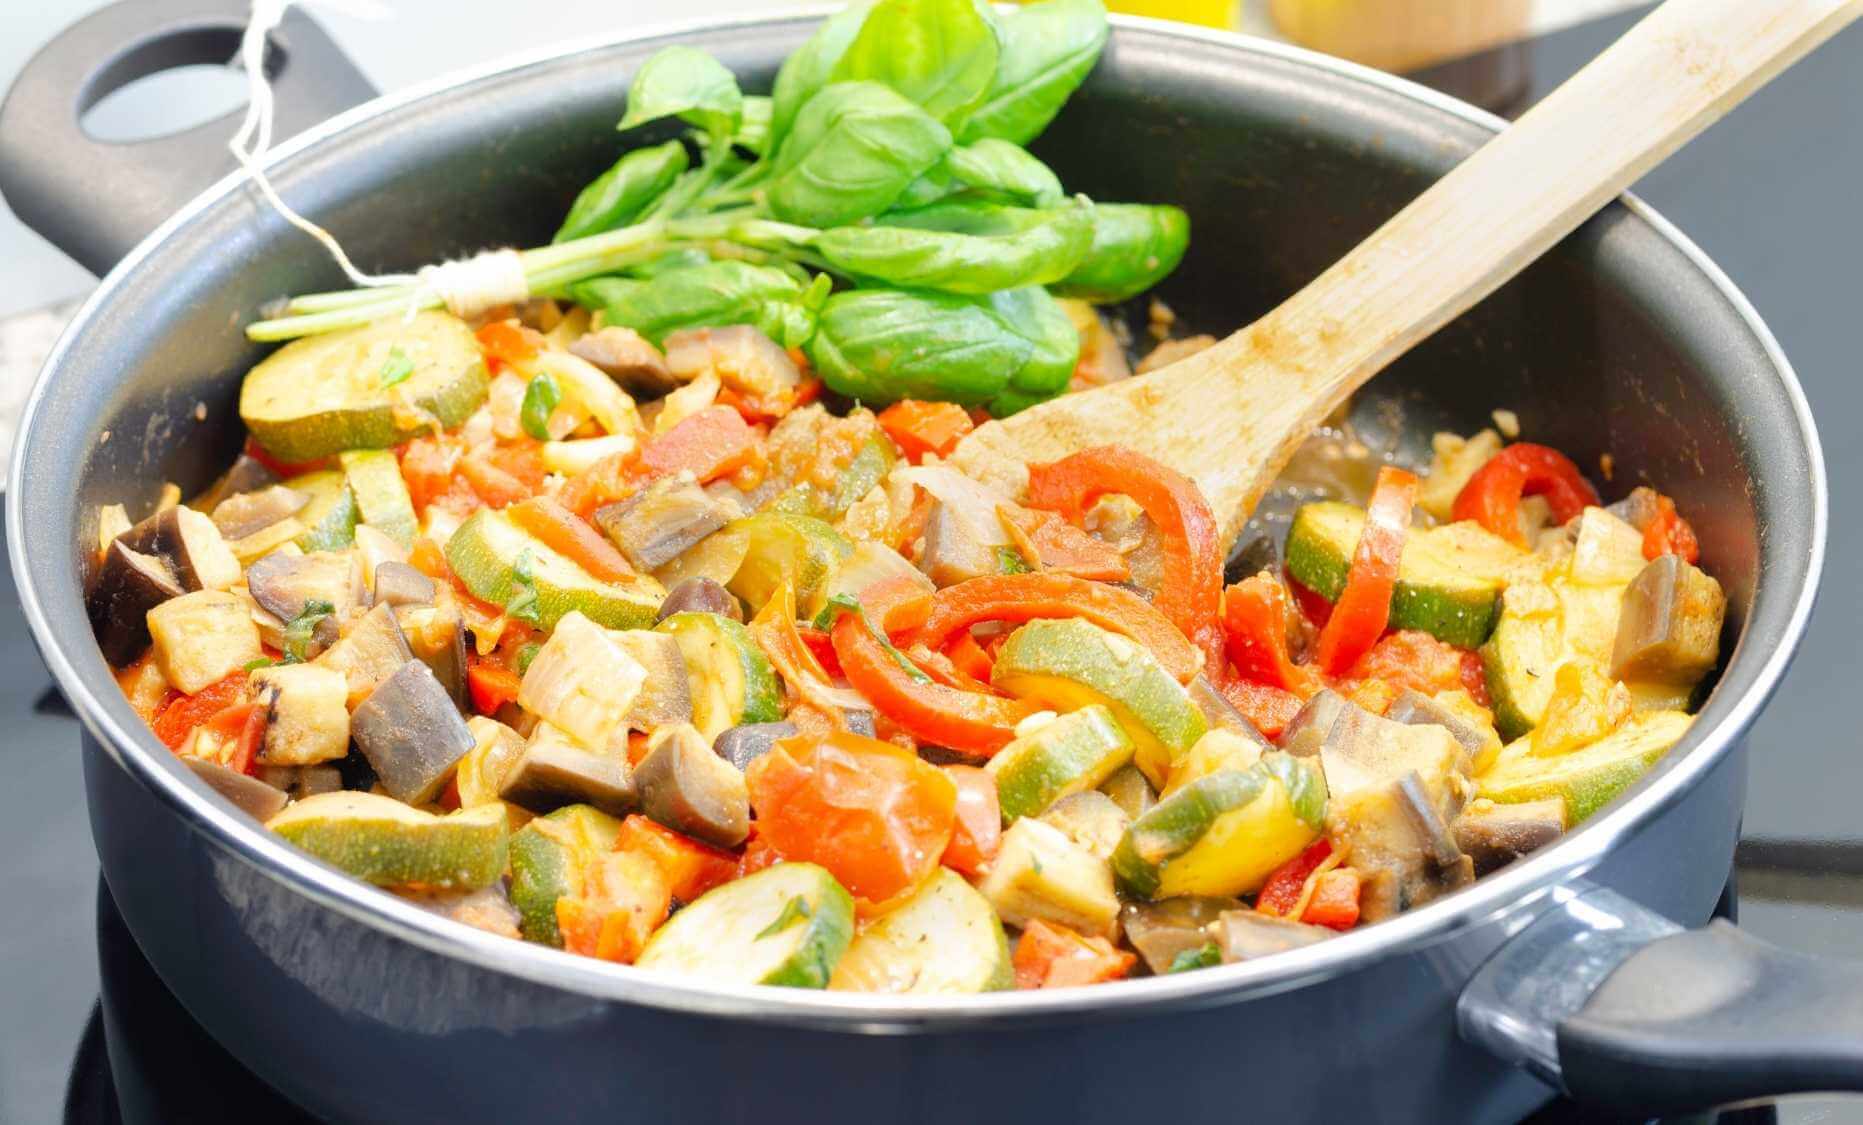 How Many Calories Are in a Vegetable Stir-Fry?